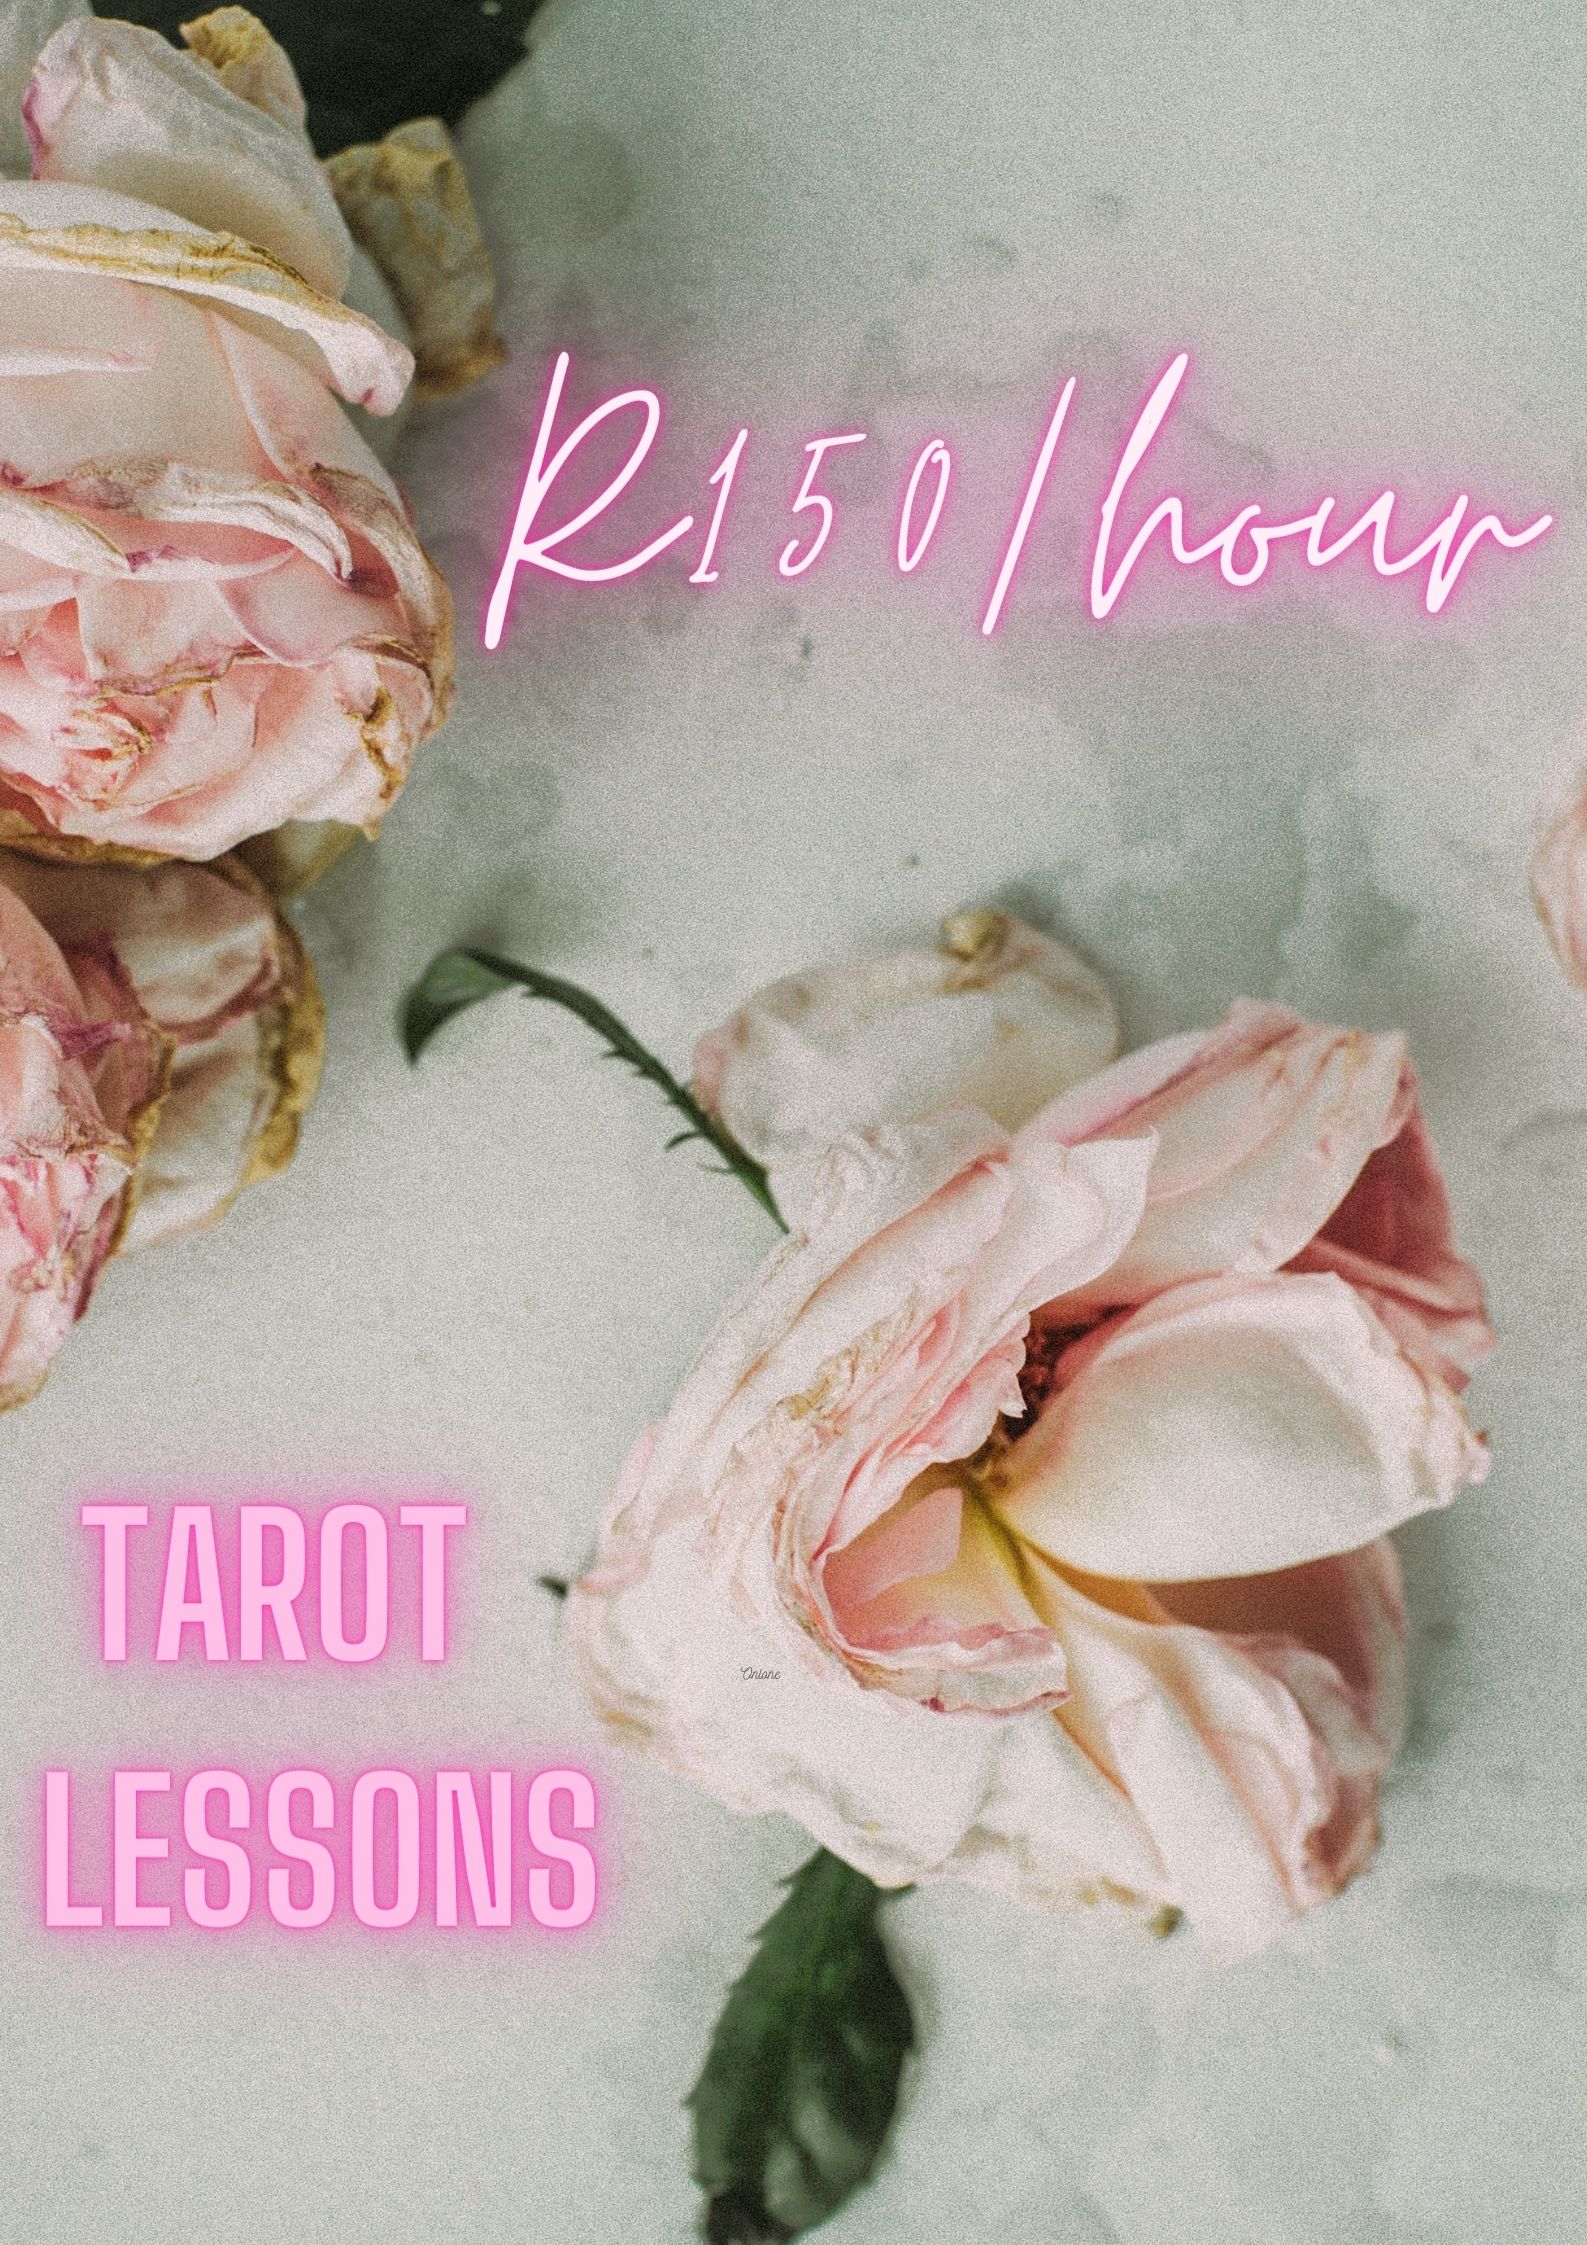 Personalised one on one tarot lessons R150 per hour online or in-person at my premises 